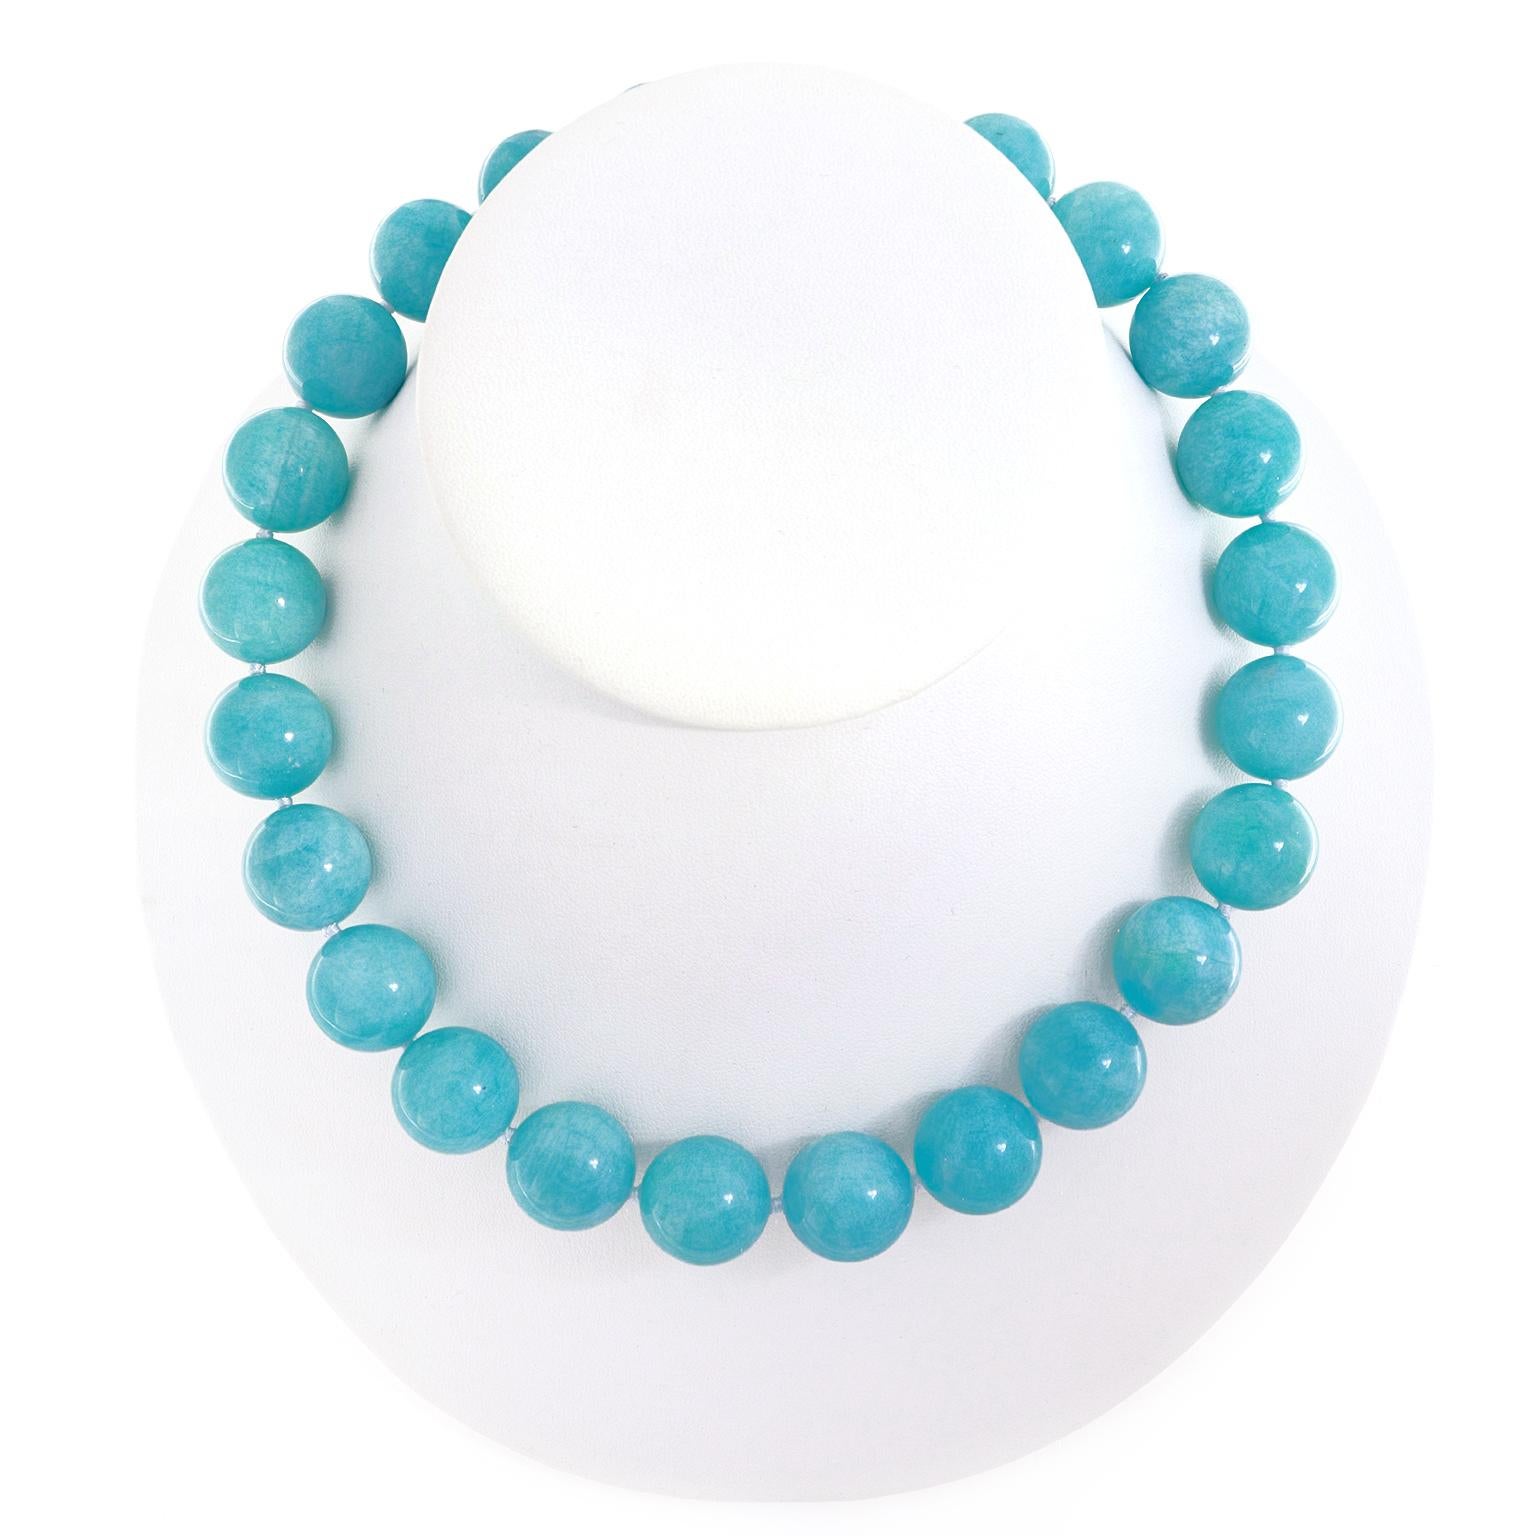 Vibrant blue green of Amazonite encompasses this necklace. Orbs of the gem, measuring 18mm, are strung together. In between a single knot of coordinating thread protects each gem. The total weight is 23 carats. An 18k yellow gold knot and toggle